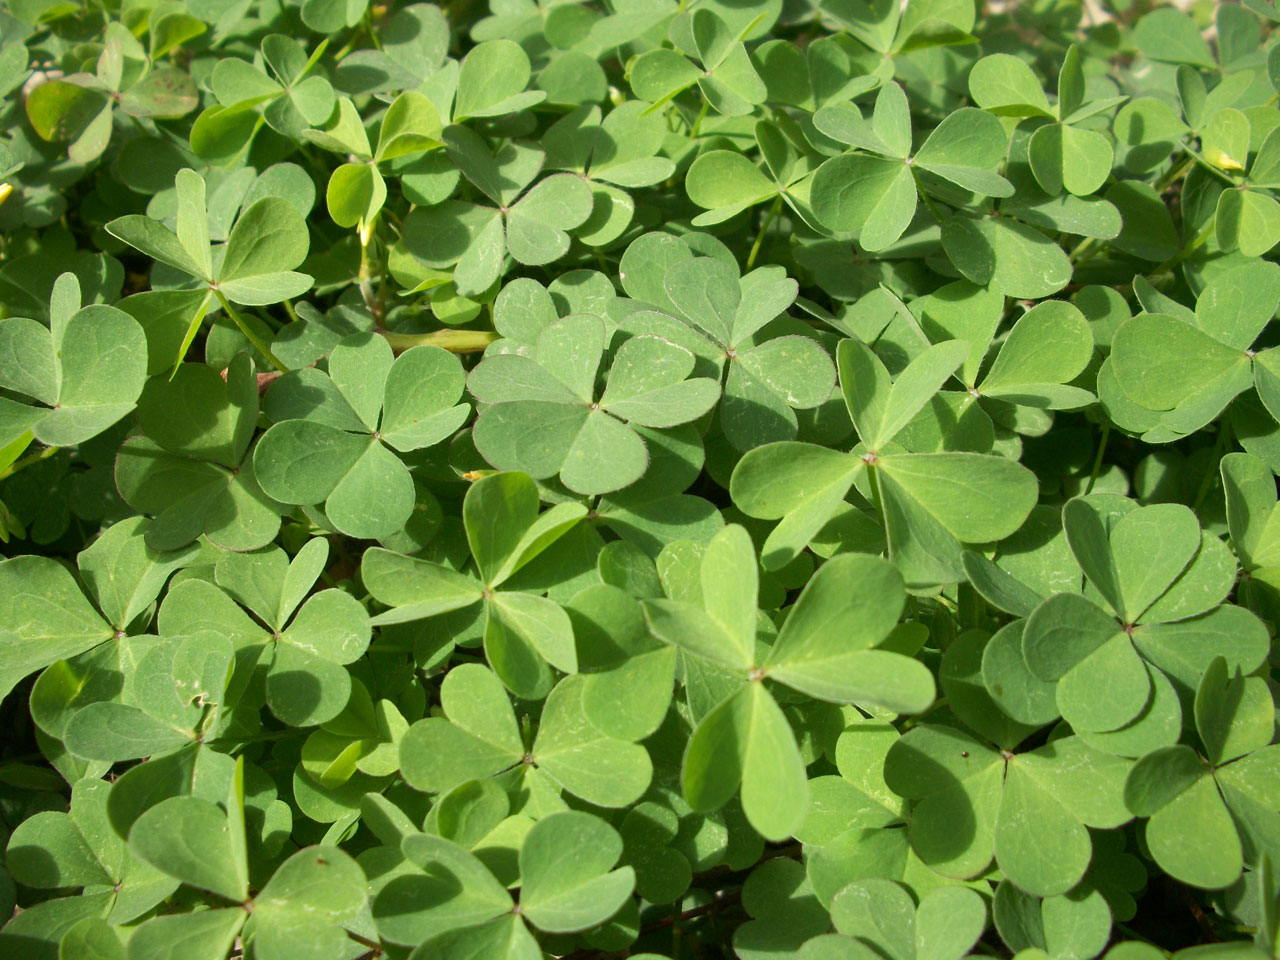 Spies clovers capture best adult free pictures